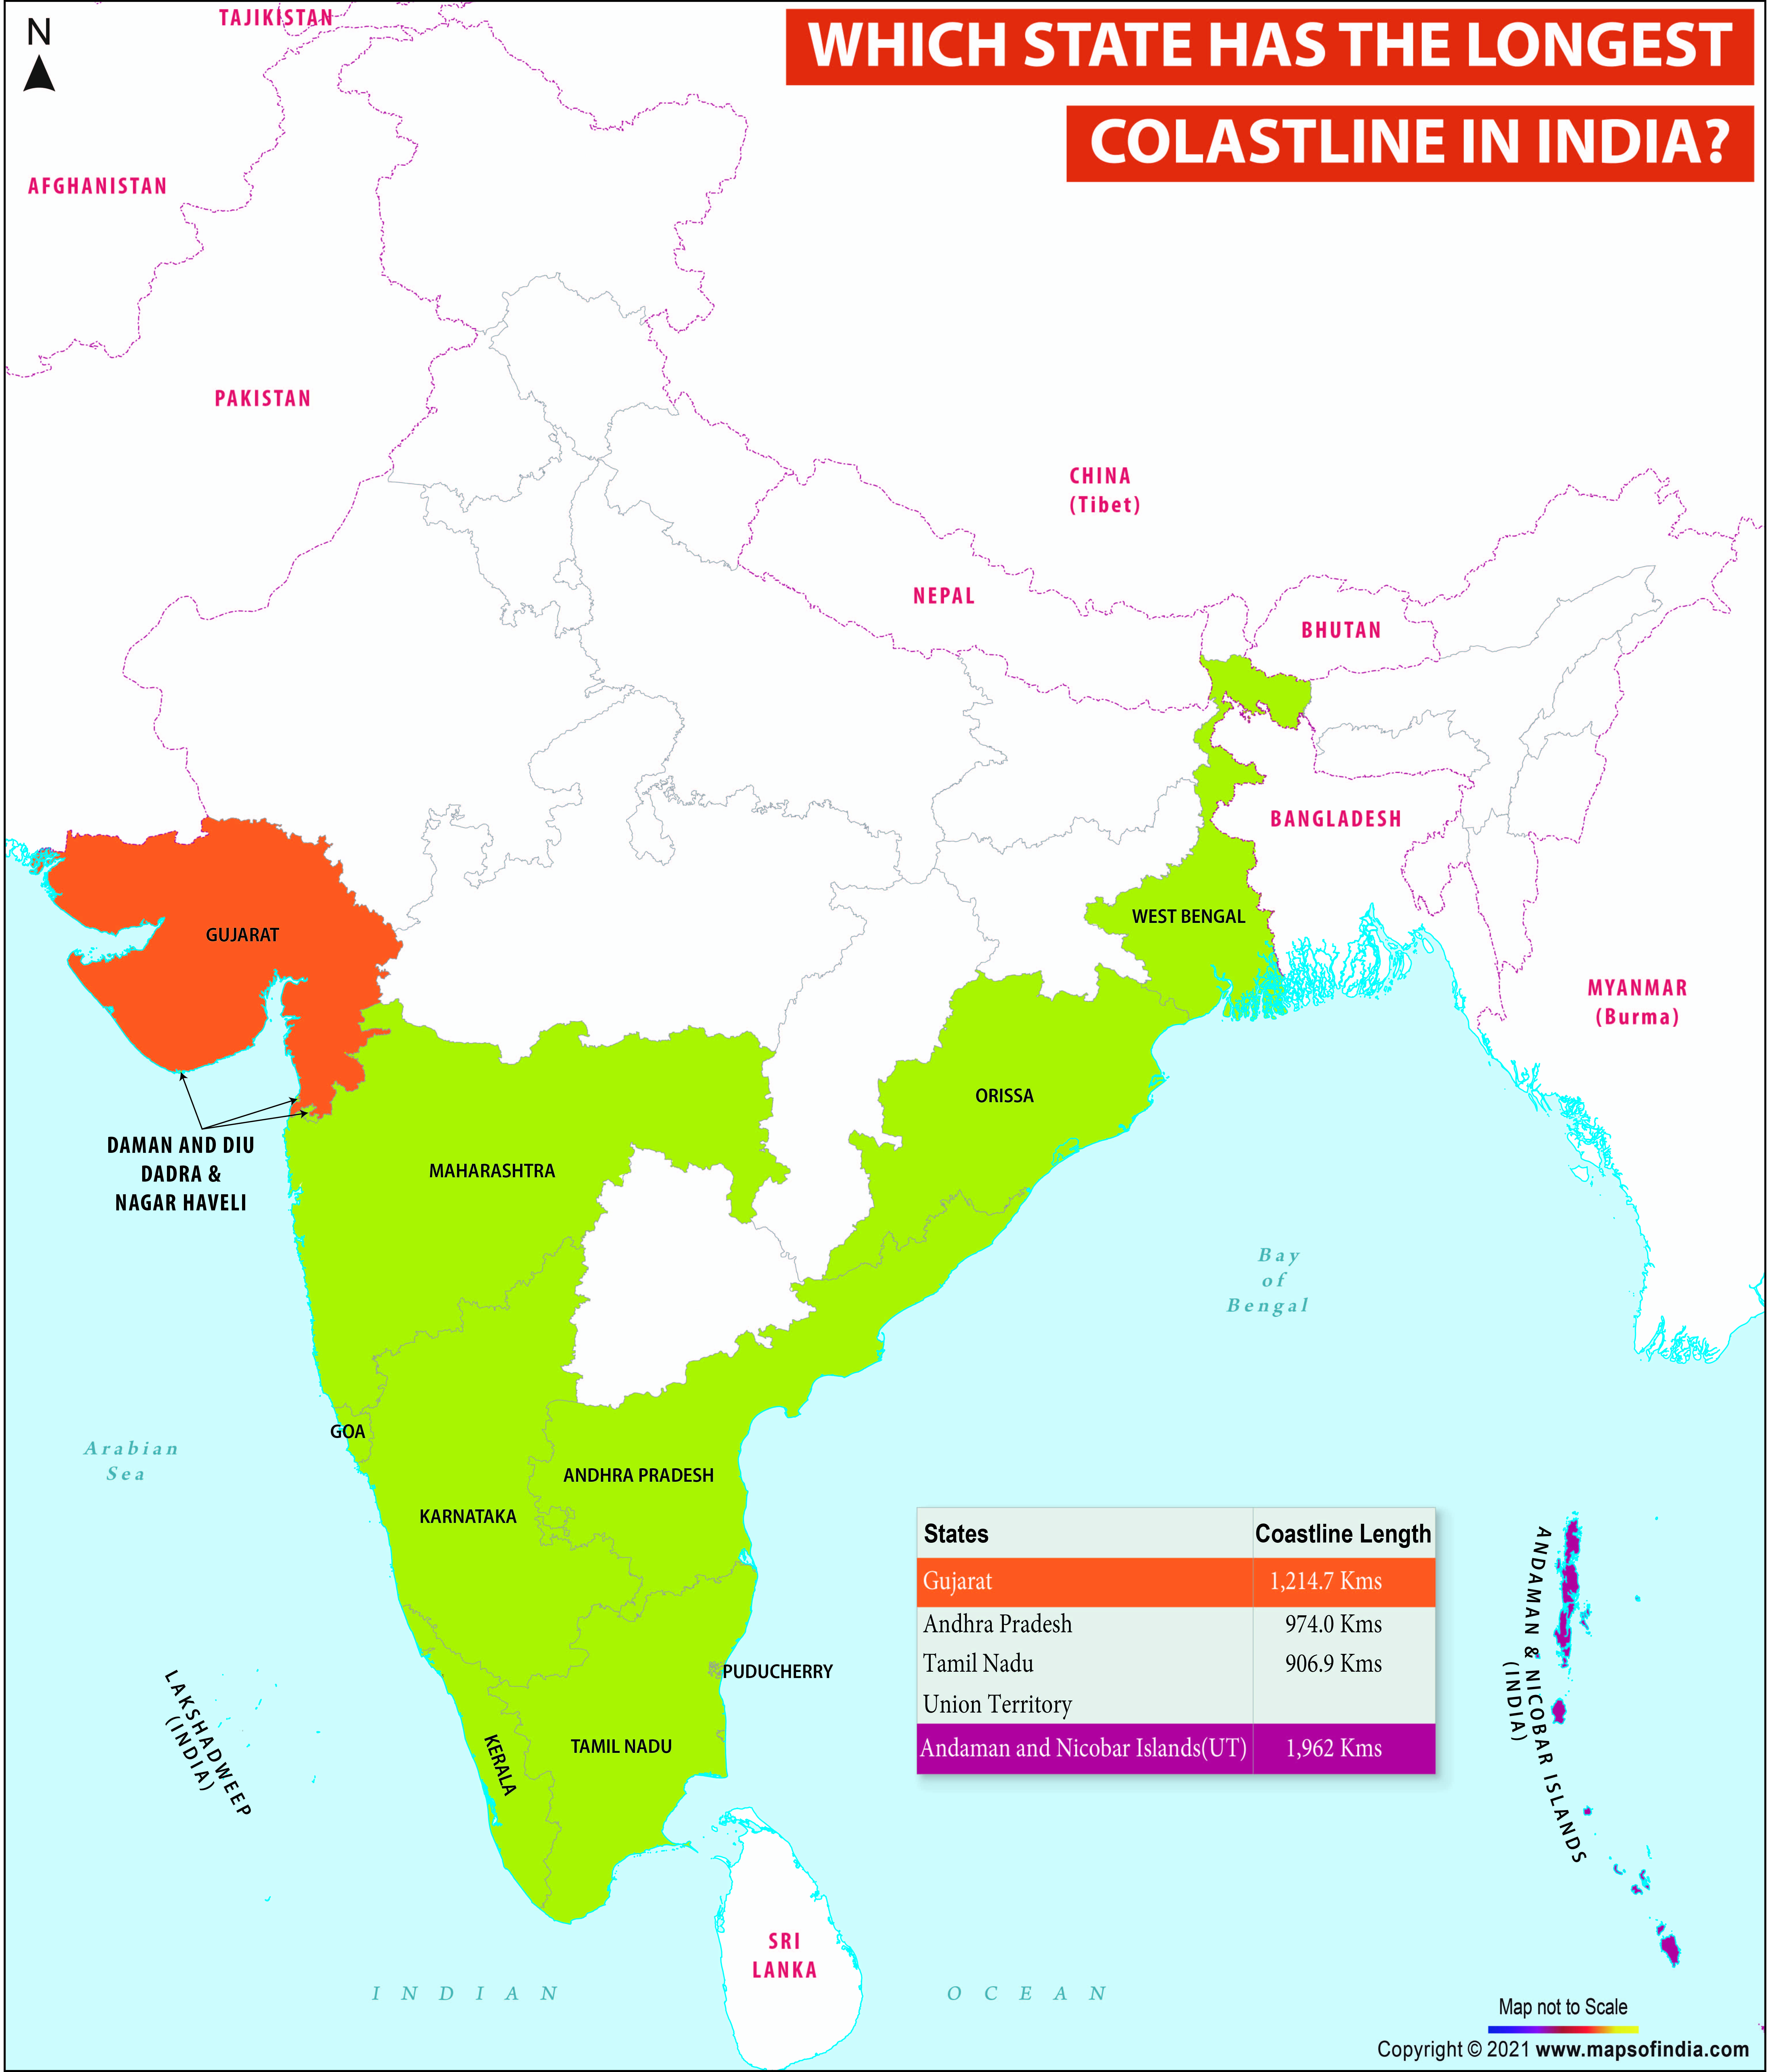 North East Monsoon in India